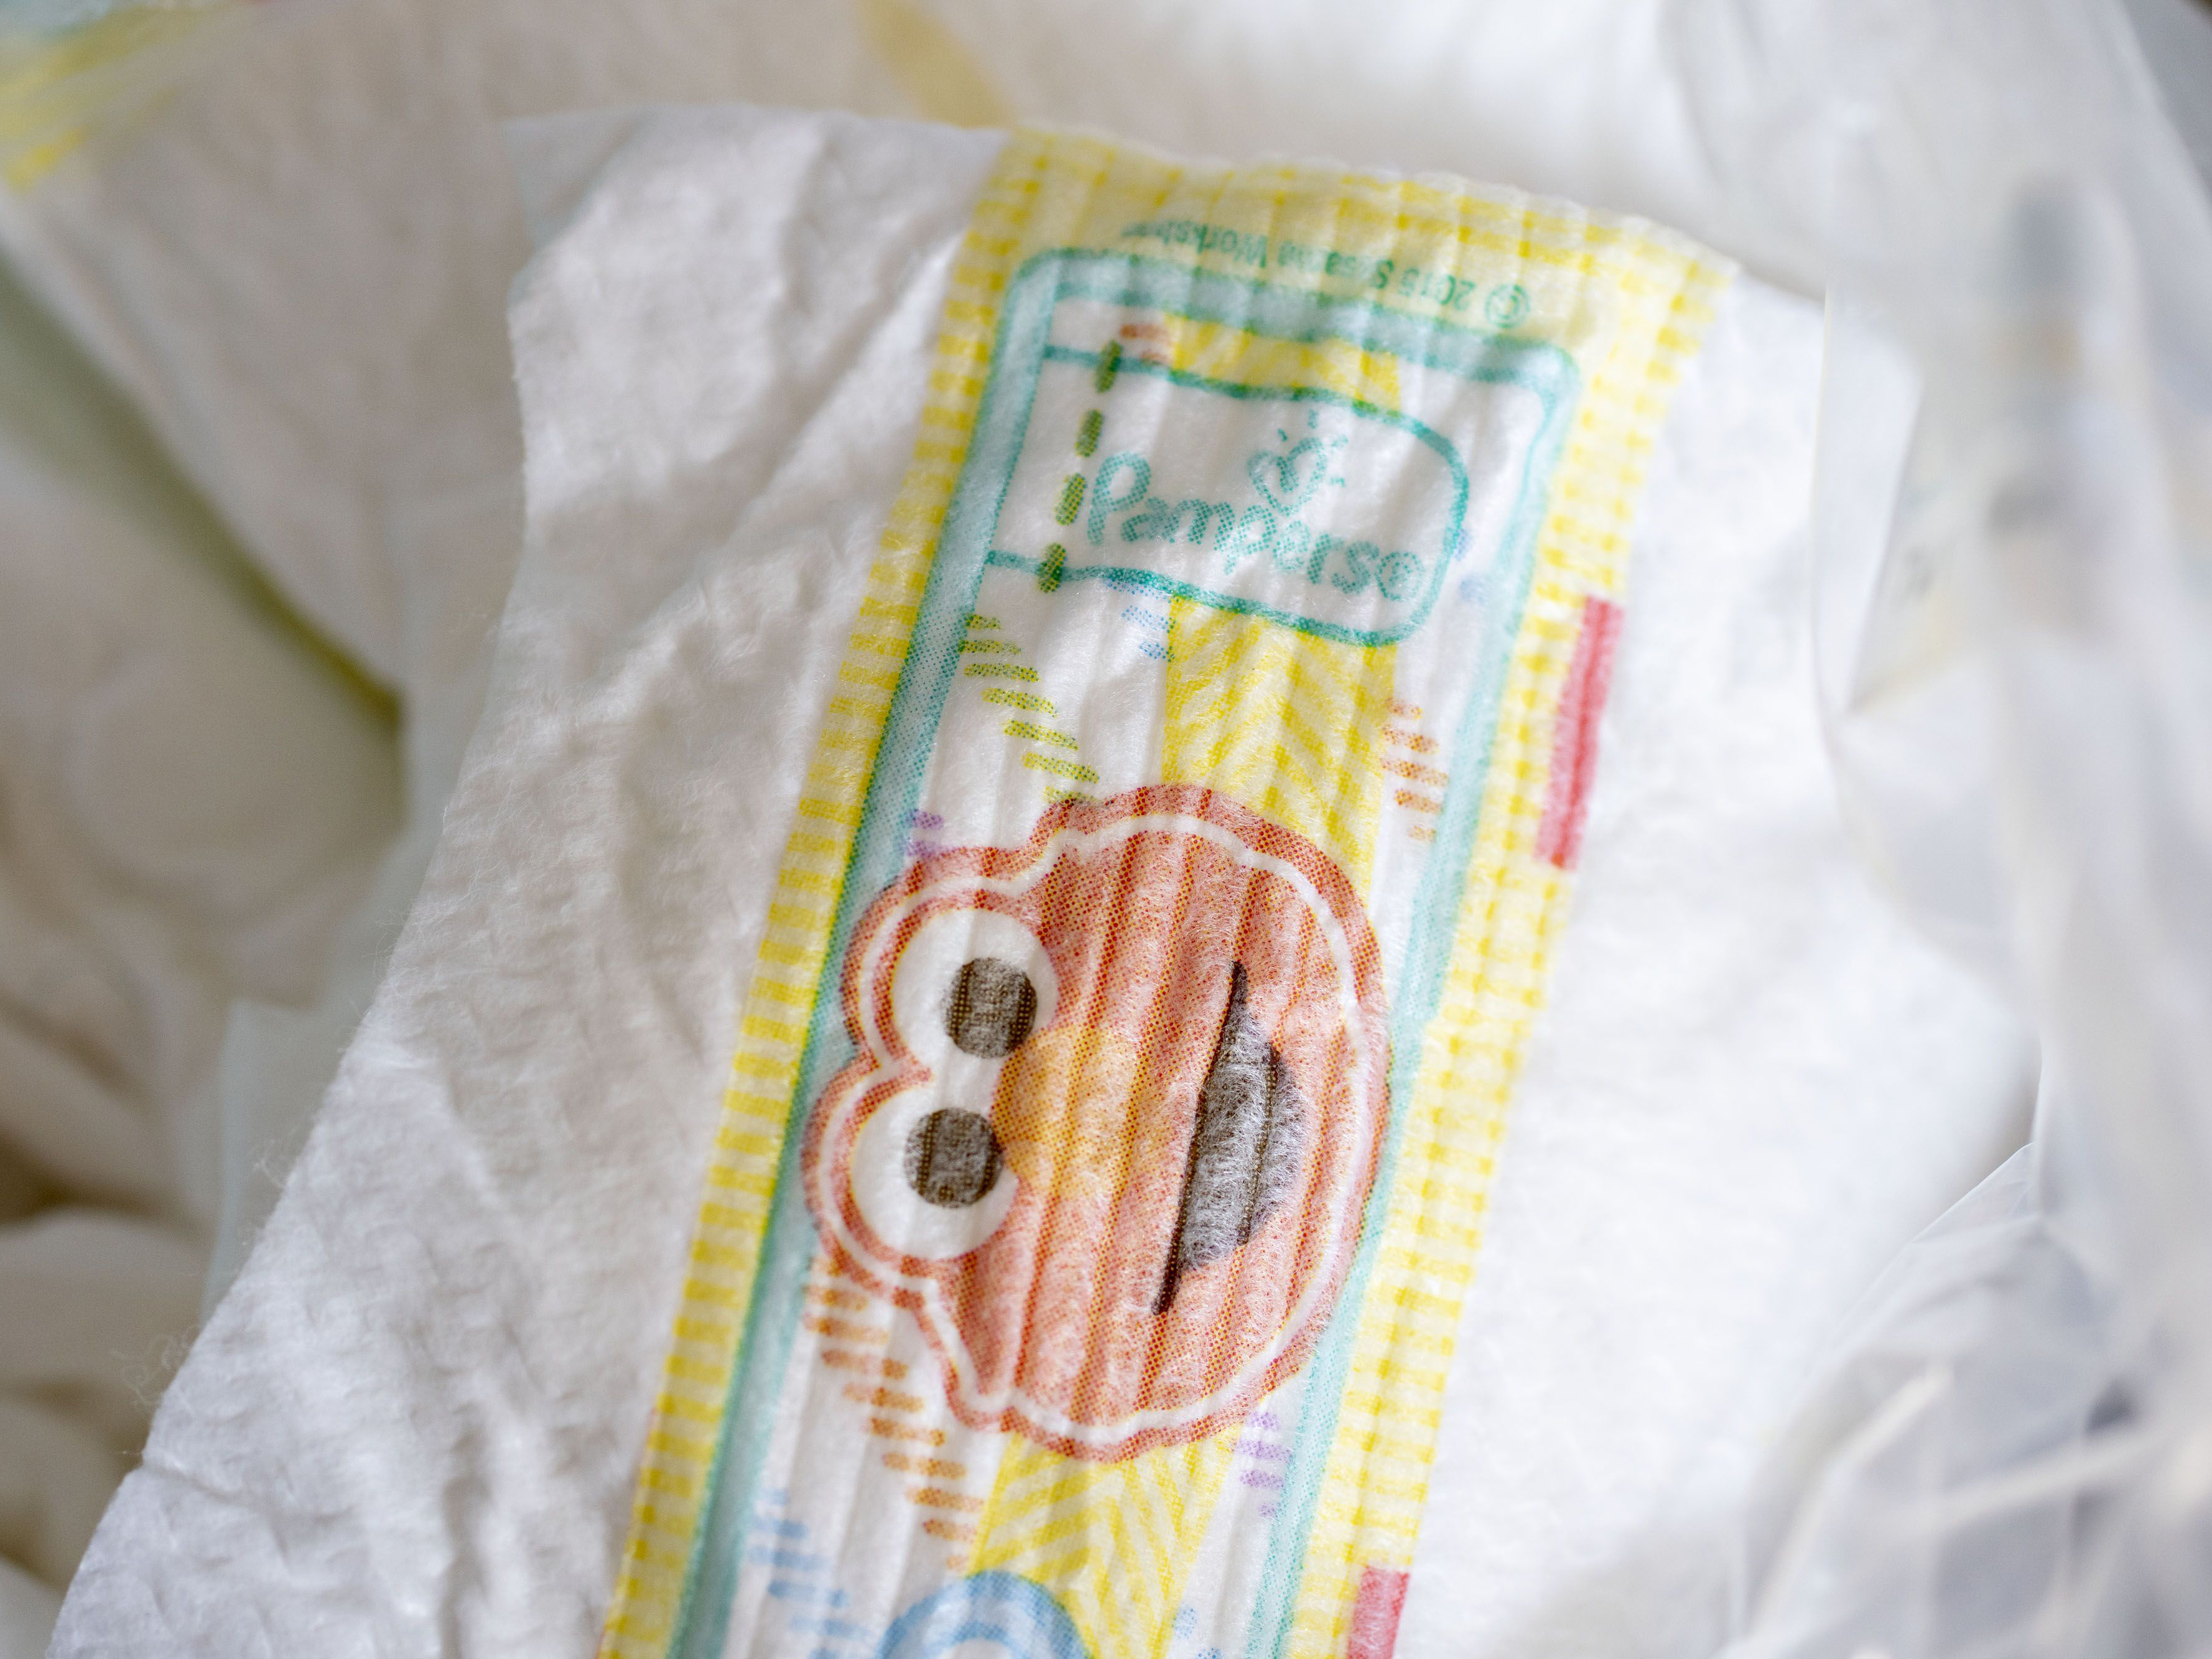 P&G Hopes to Develop Recyclable Diaper in Battle Against Waste